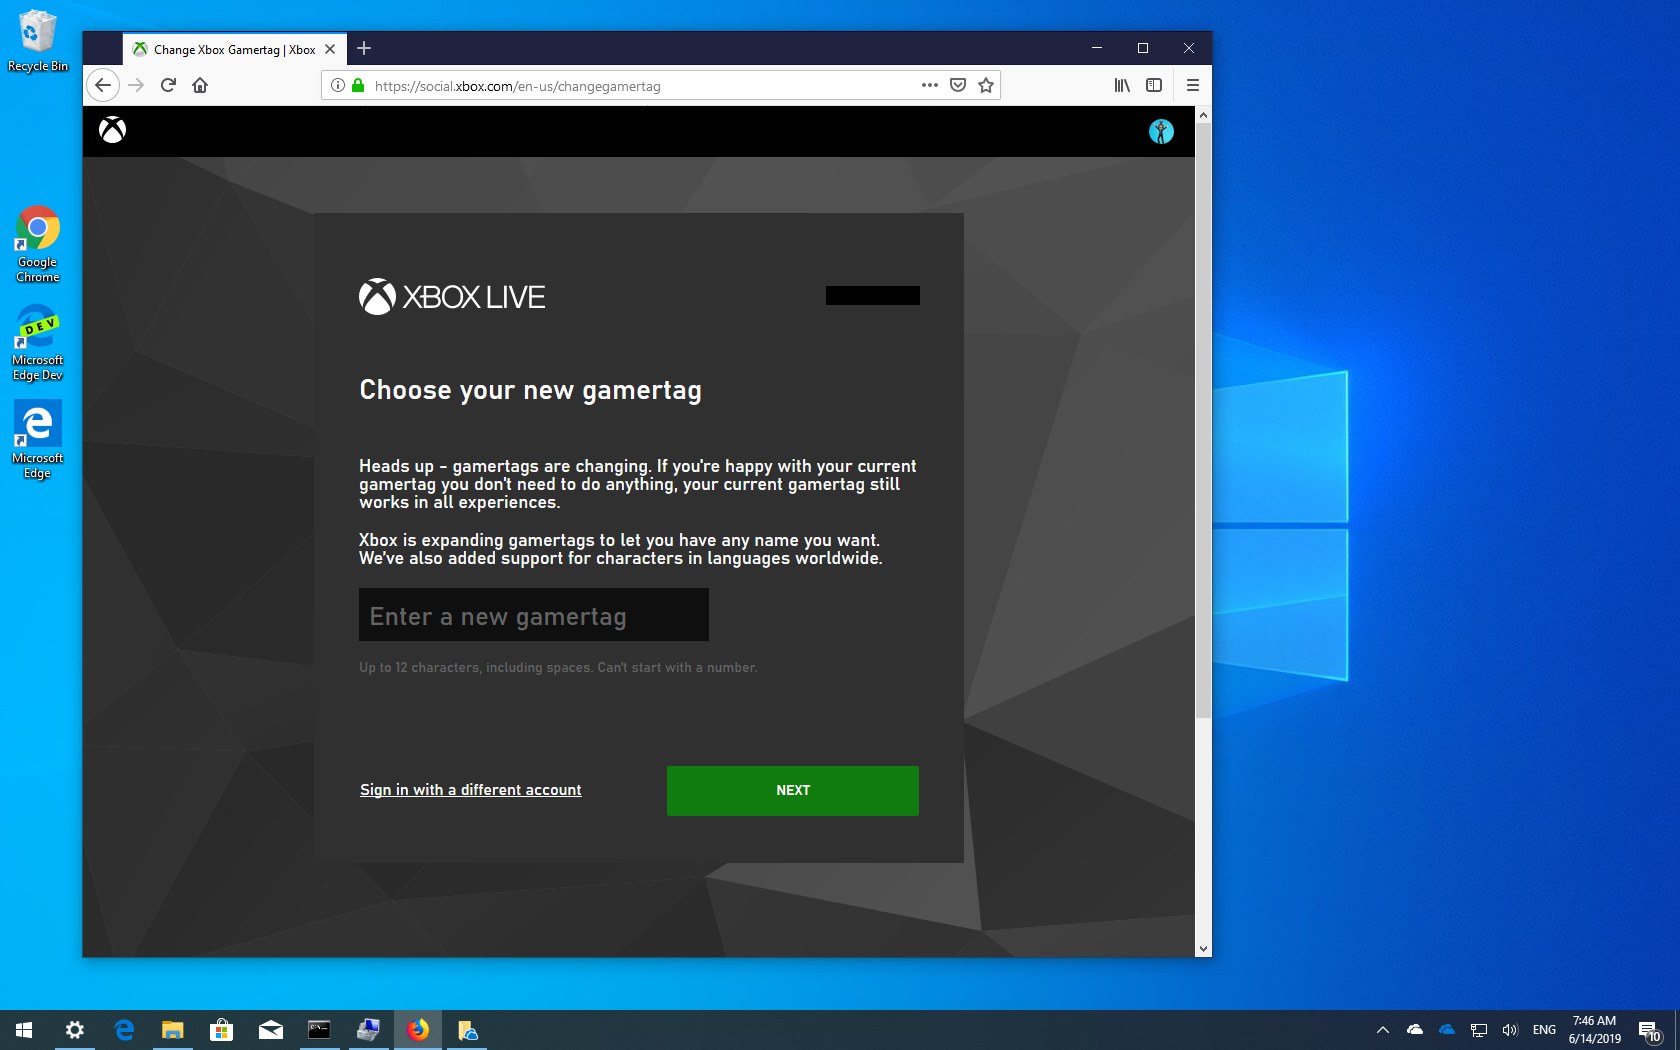 teller pin 鍔 How to change Xbox gamertag to anything you want - Pureinfotech